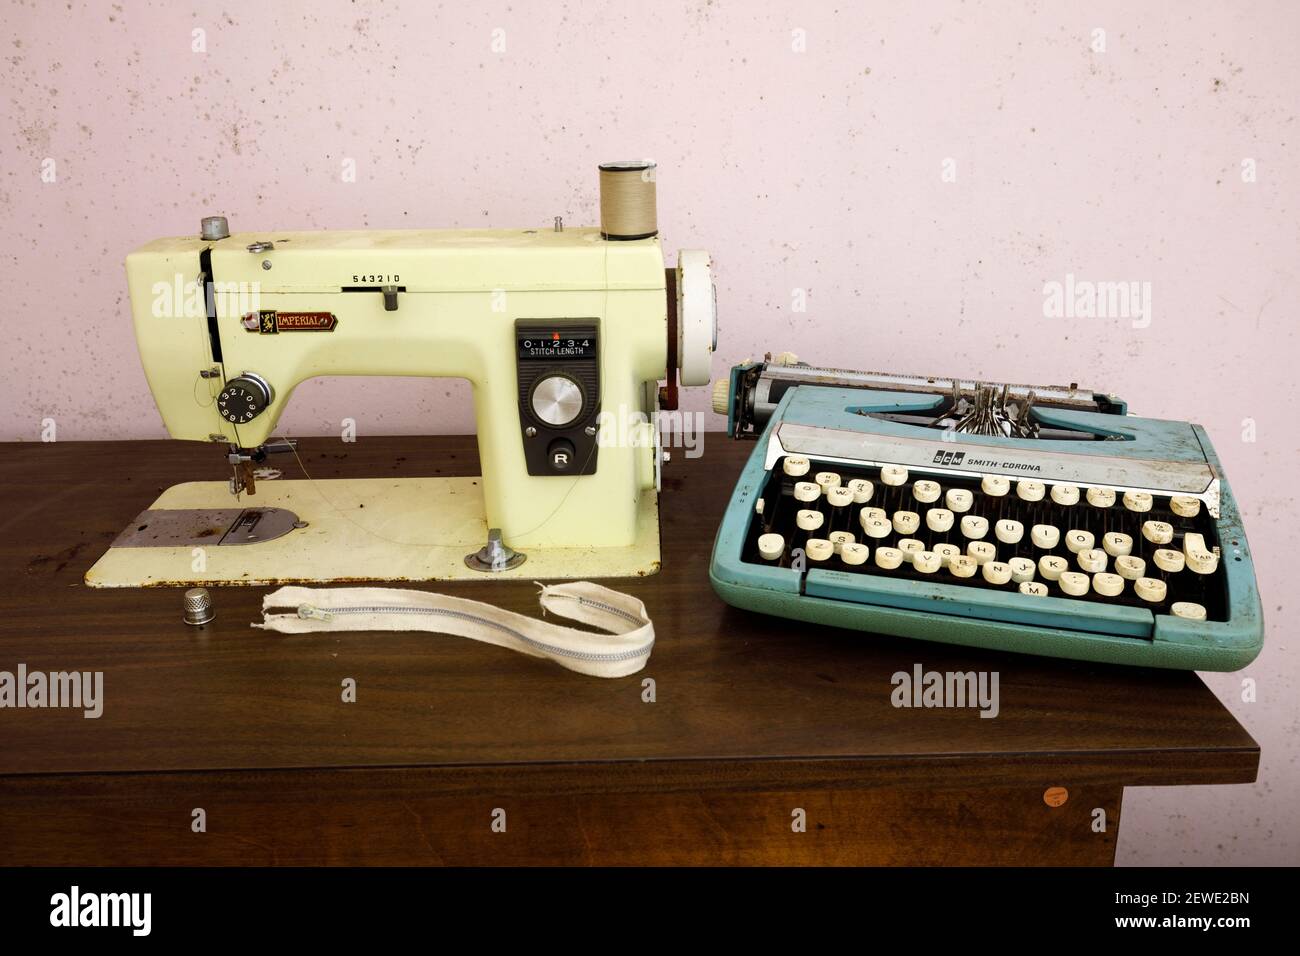 An Imperial sewing machine model 535 and a Smith Corona SCM Corsair Deluxe typewriter. Stock Photo